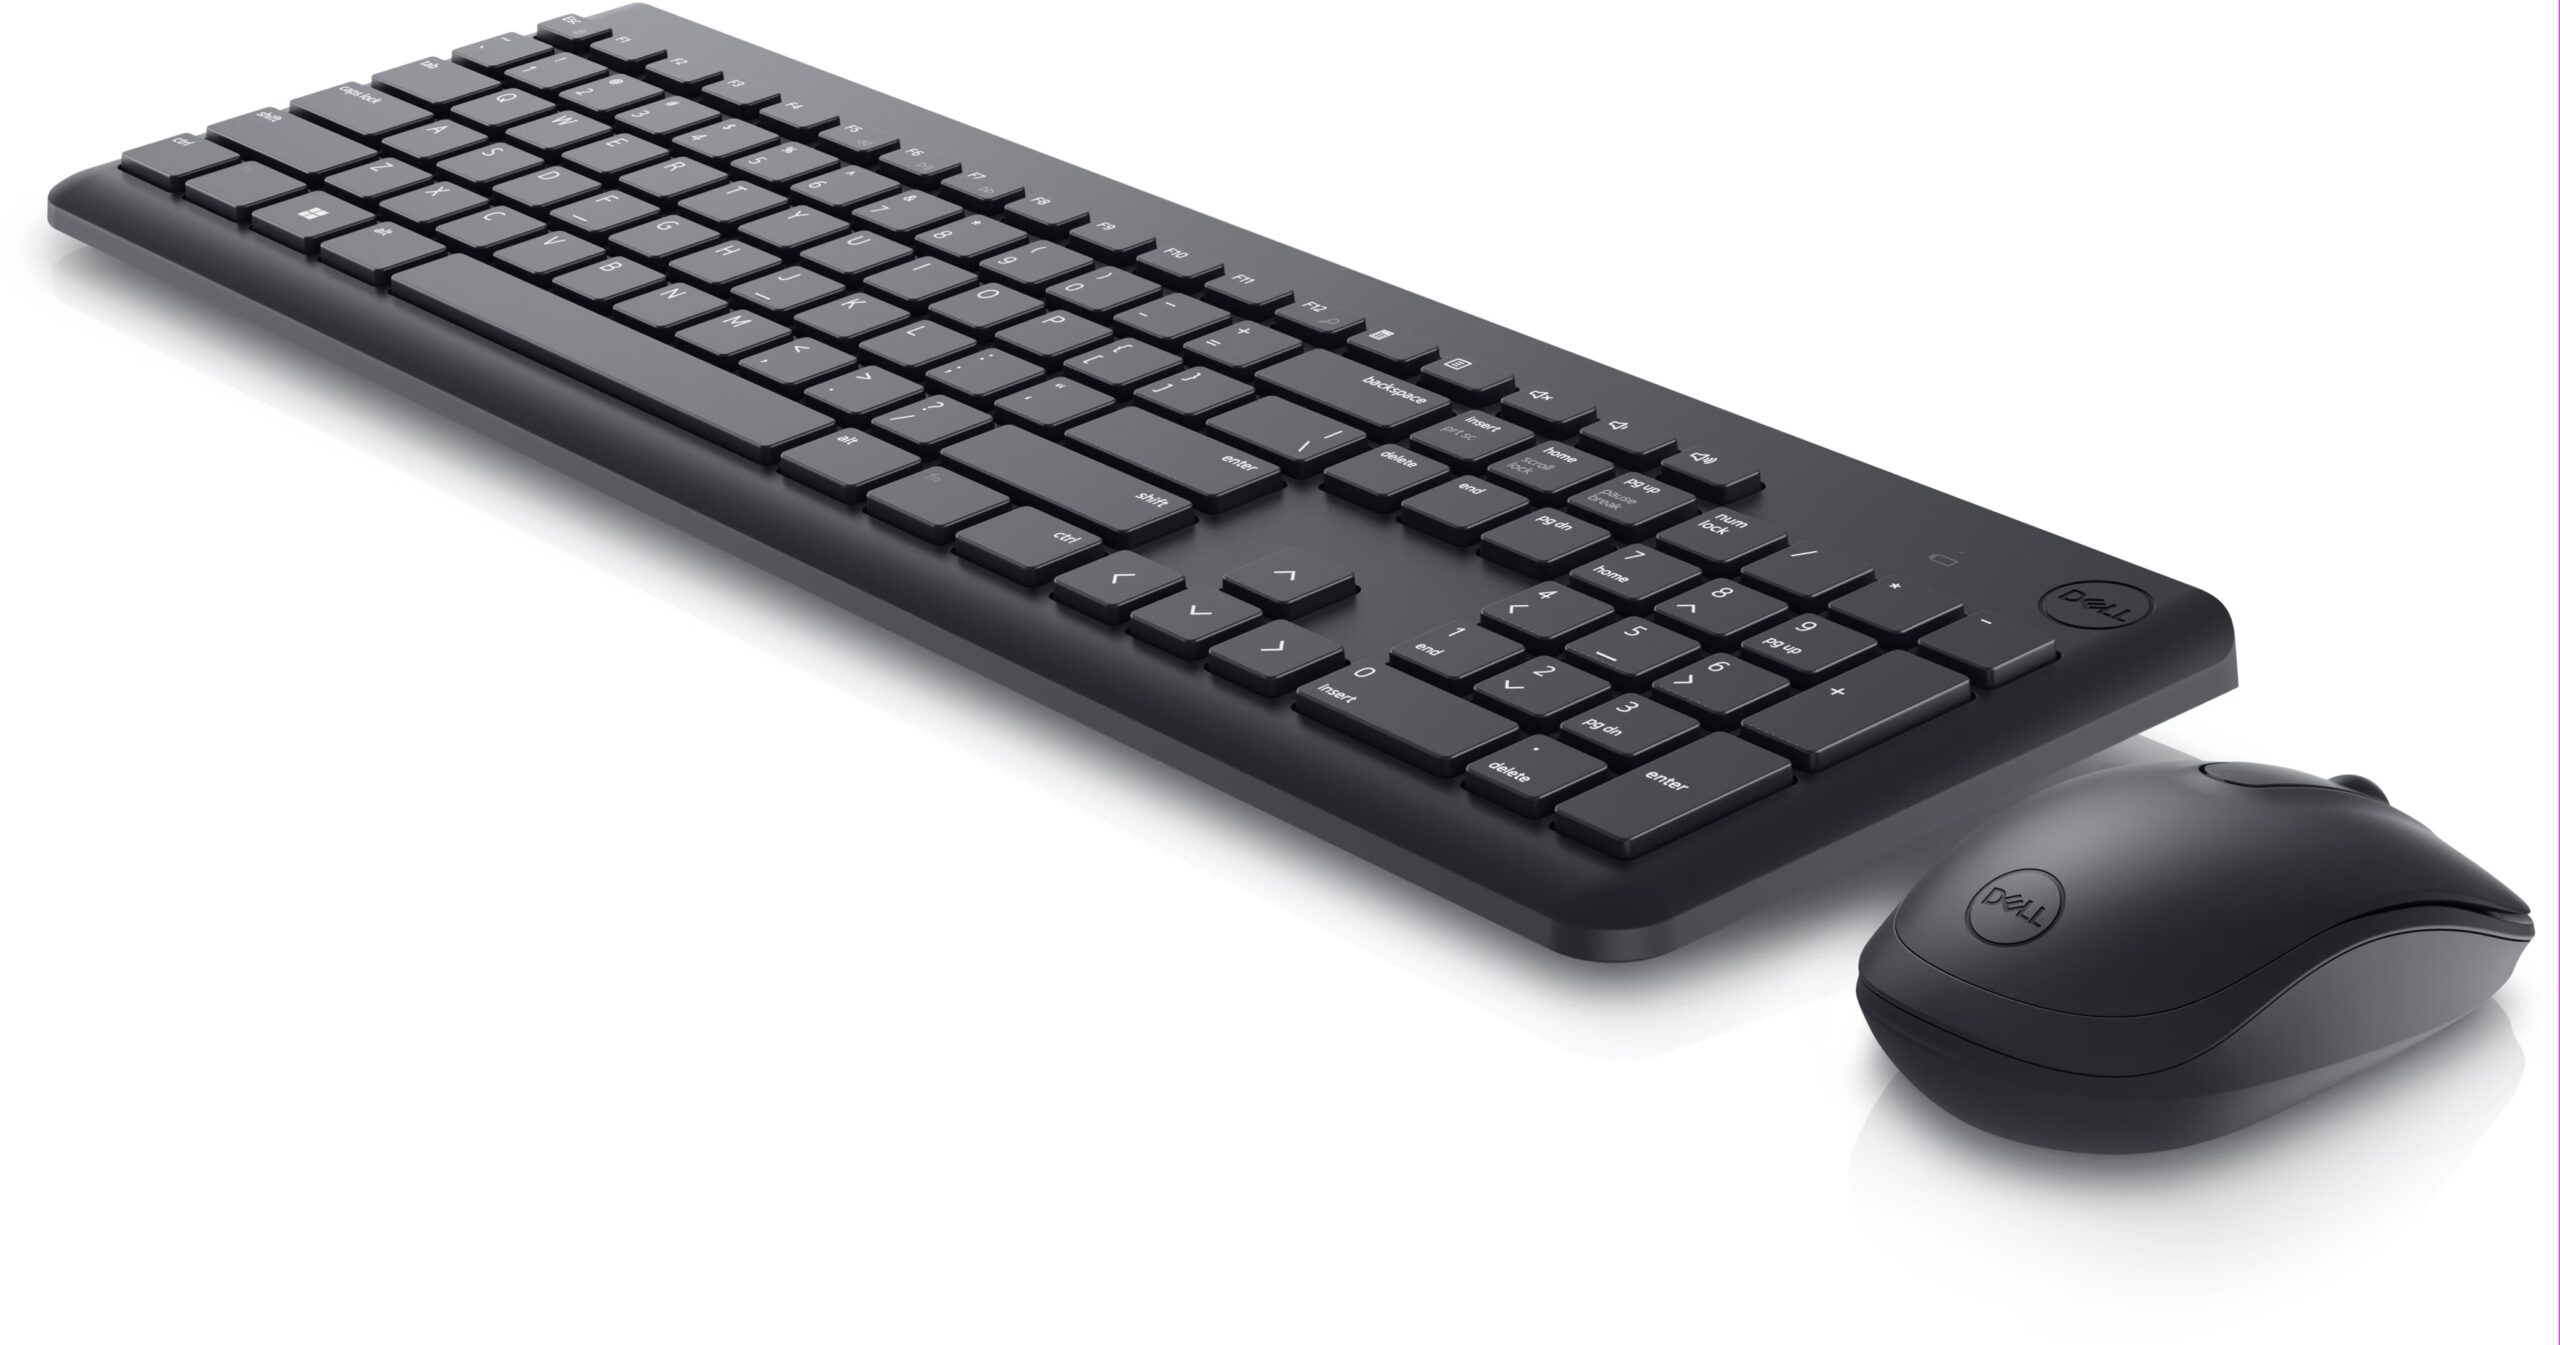 dell wireless keyboard and mouse